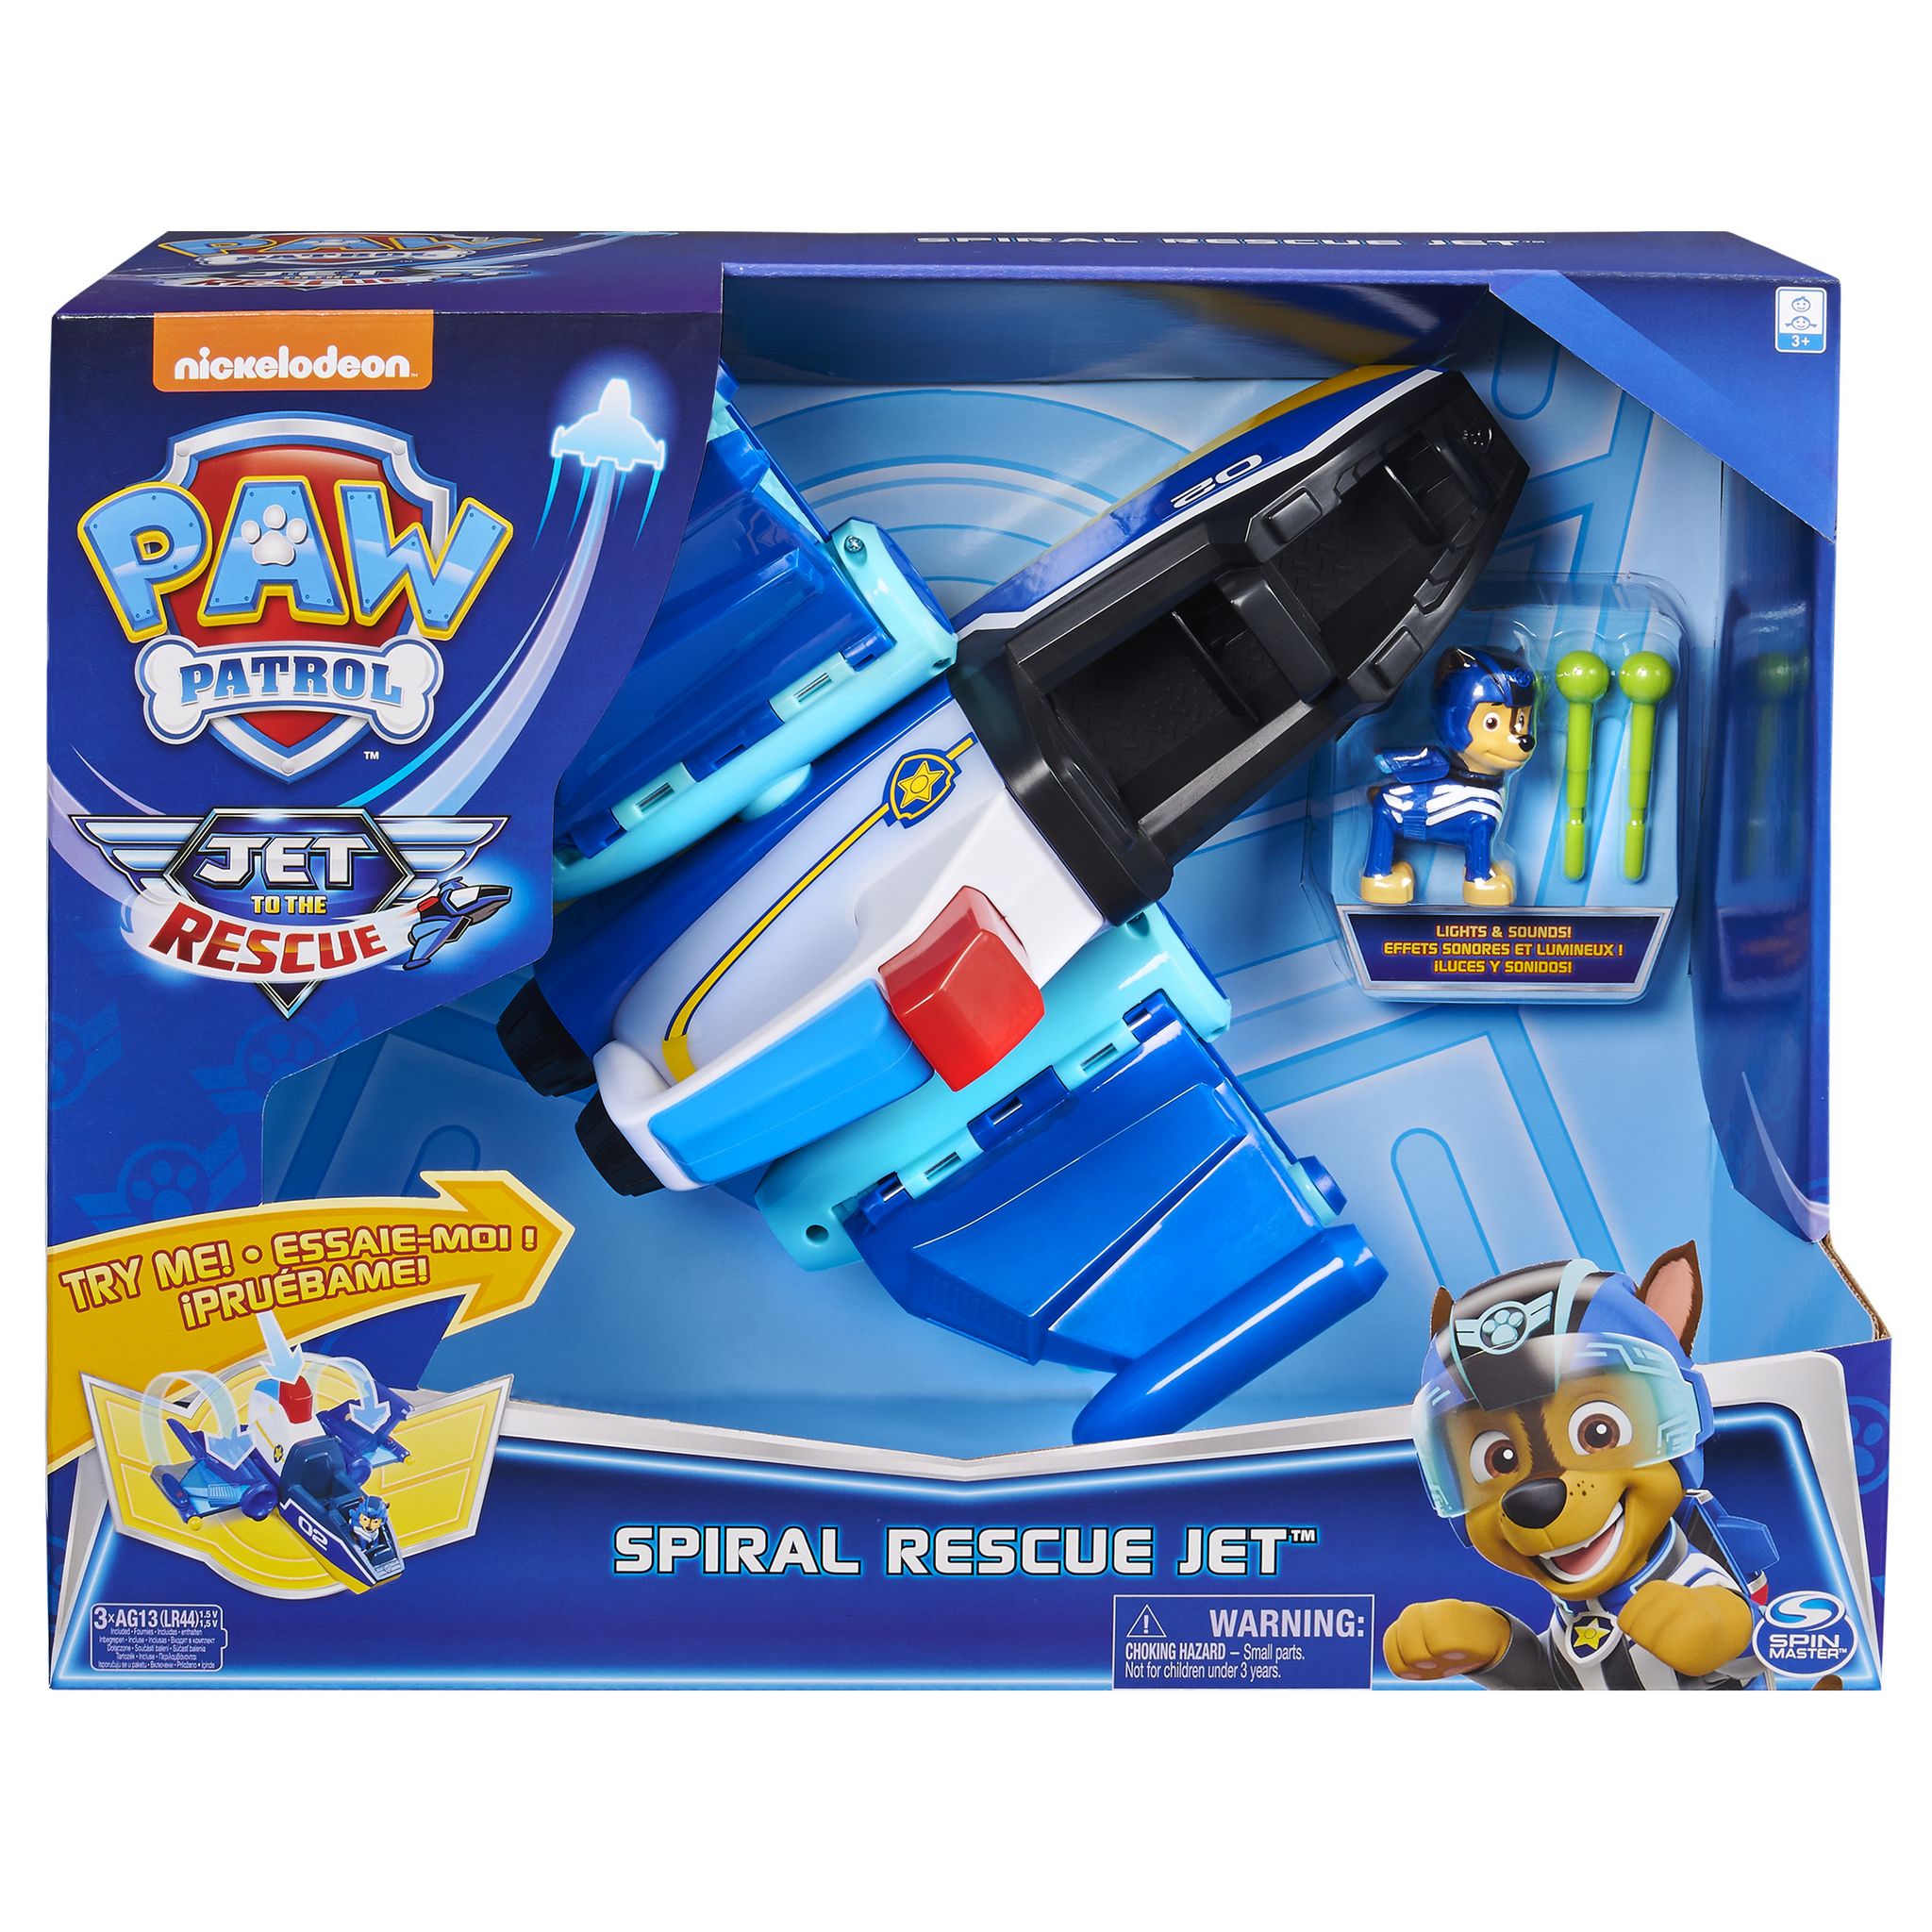 SPIN MASTER Avion Jet Deluxe Rescue Spiral + Figurine Chase - Pat